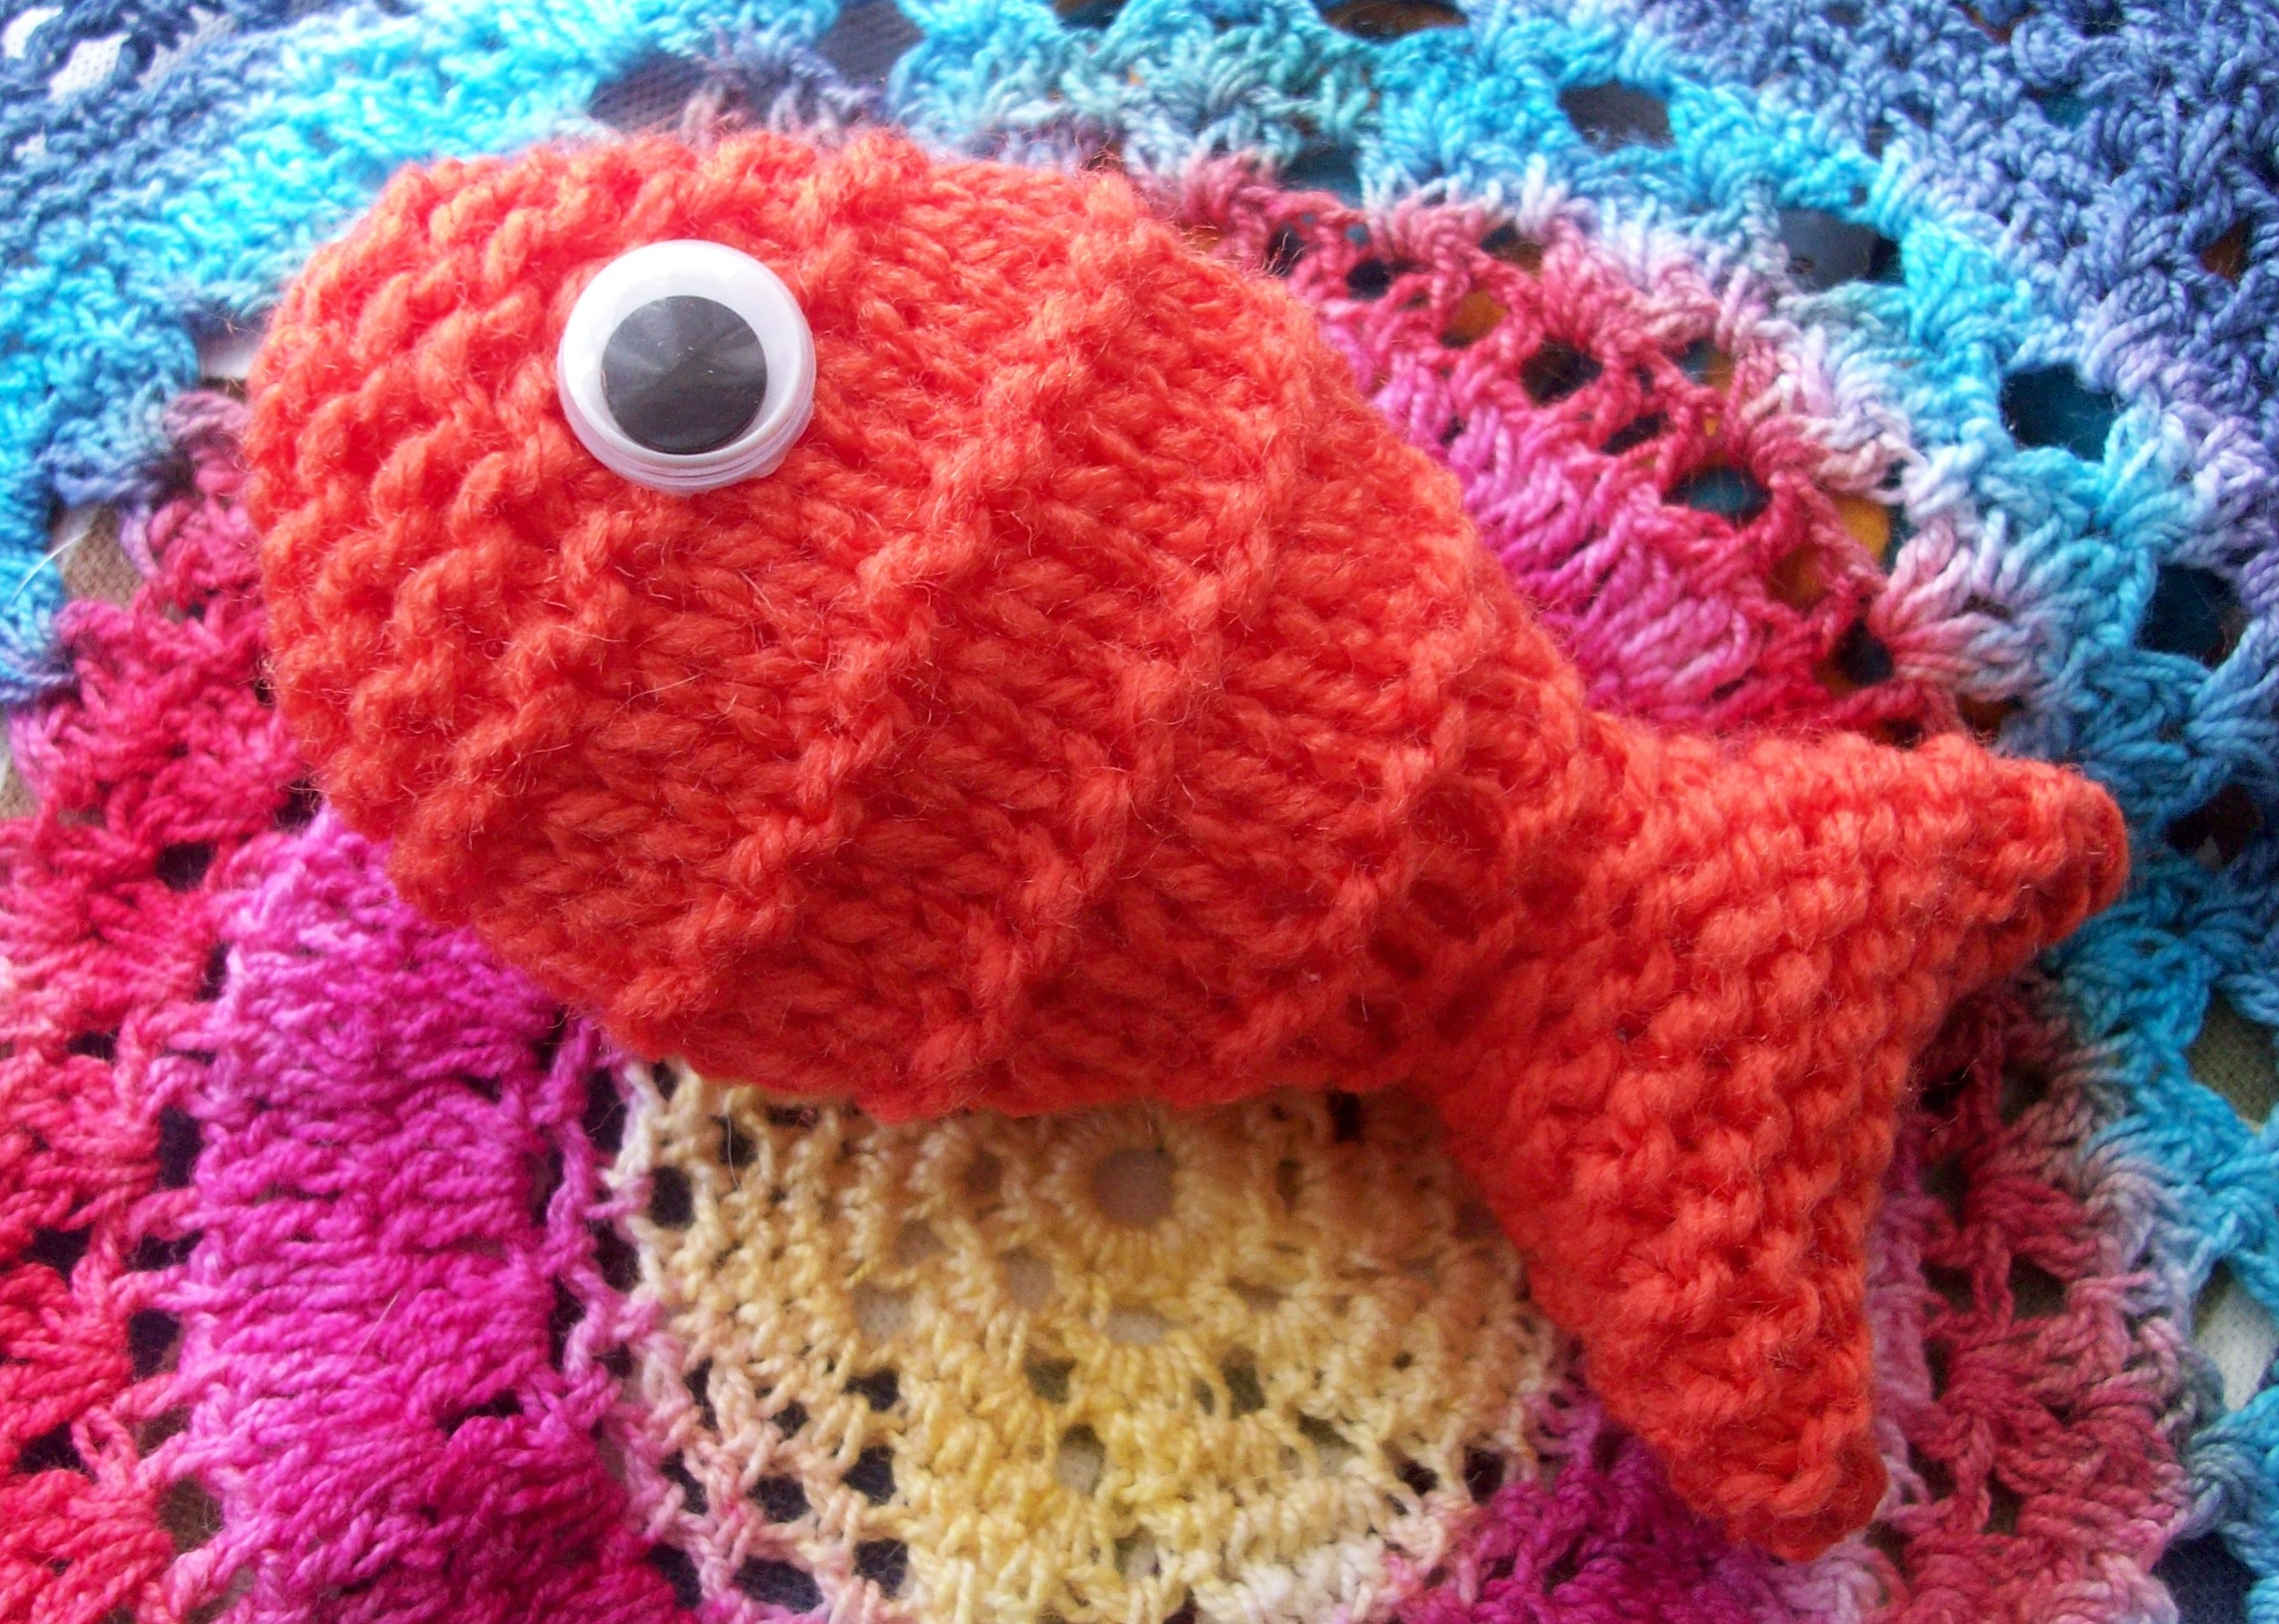 Fish Knitting Pattern Free Knitted Fish The Big Blue Bully Bus